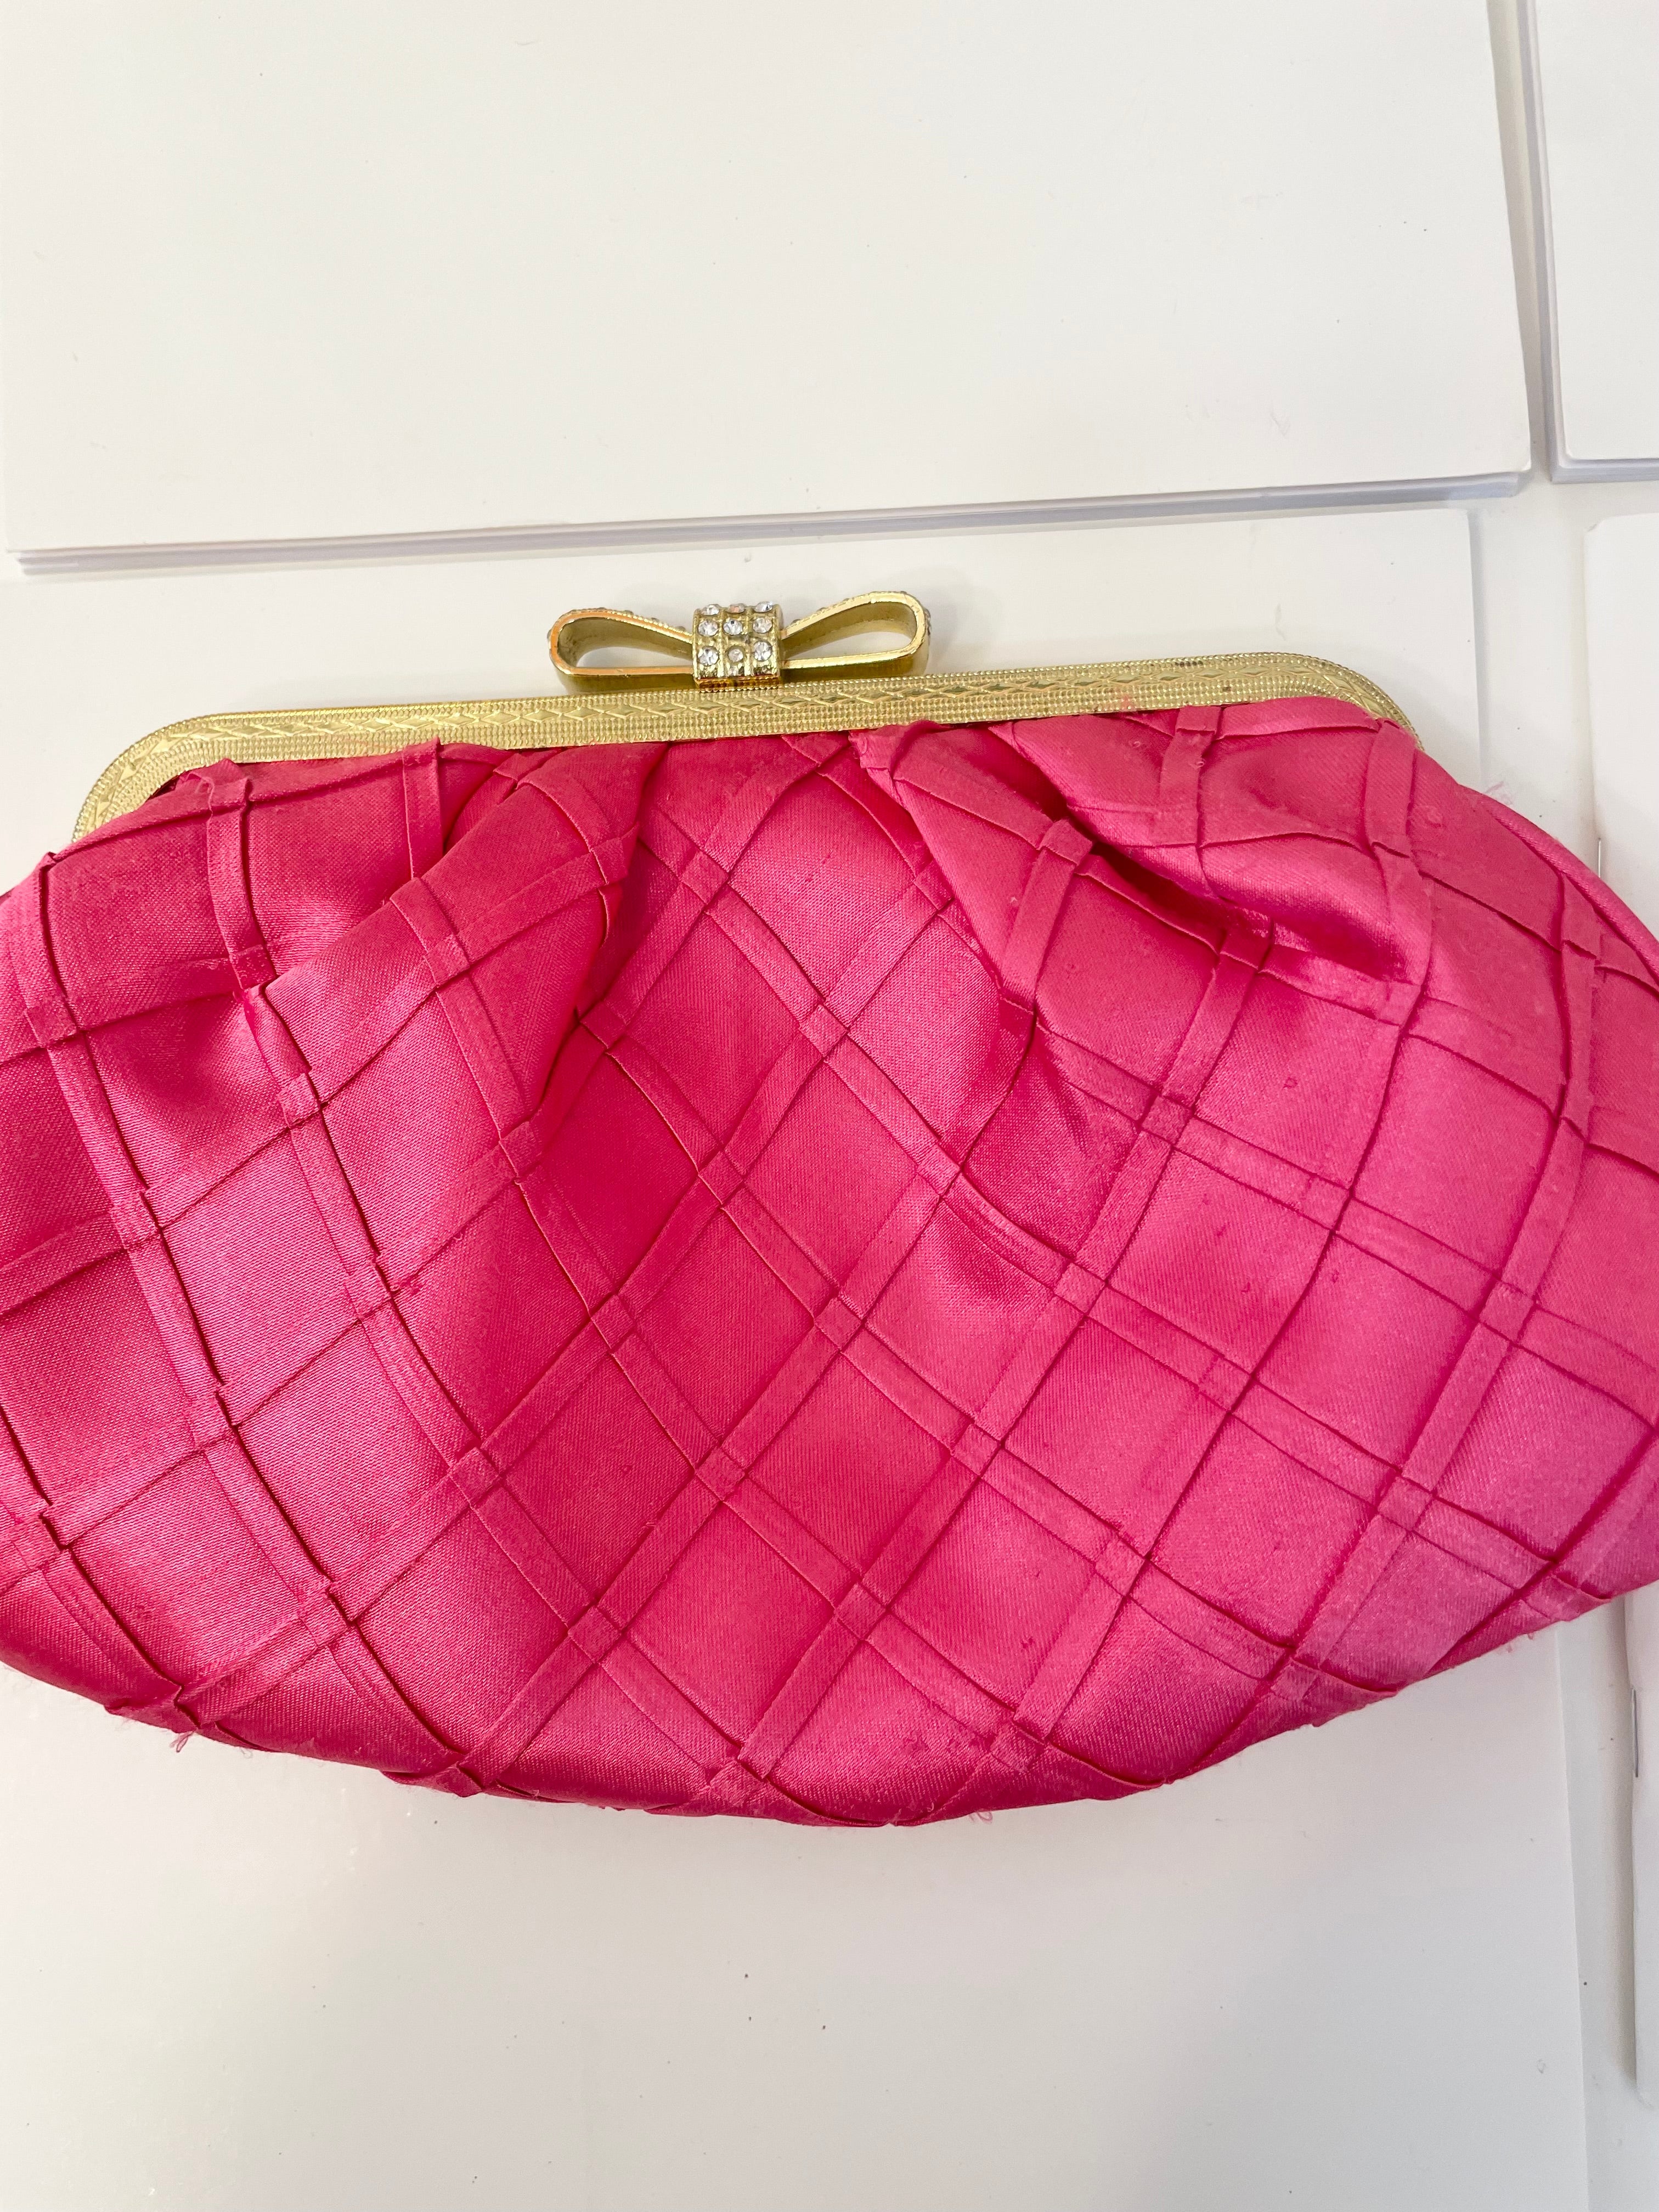 The Flirty gal loves a sassy pink satin evening bag.... so chic